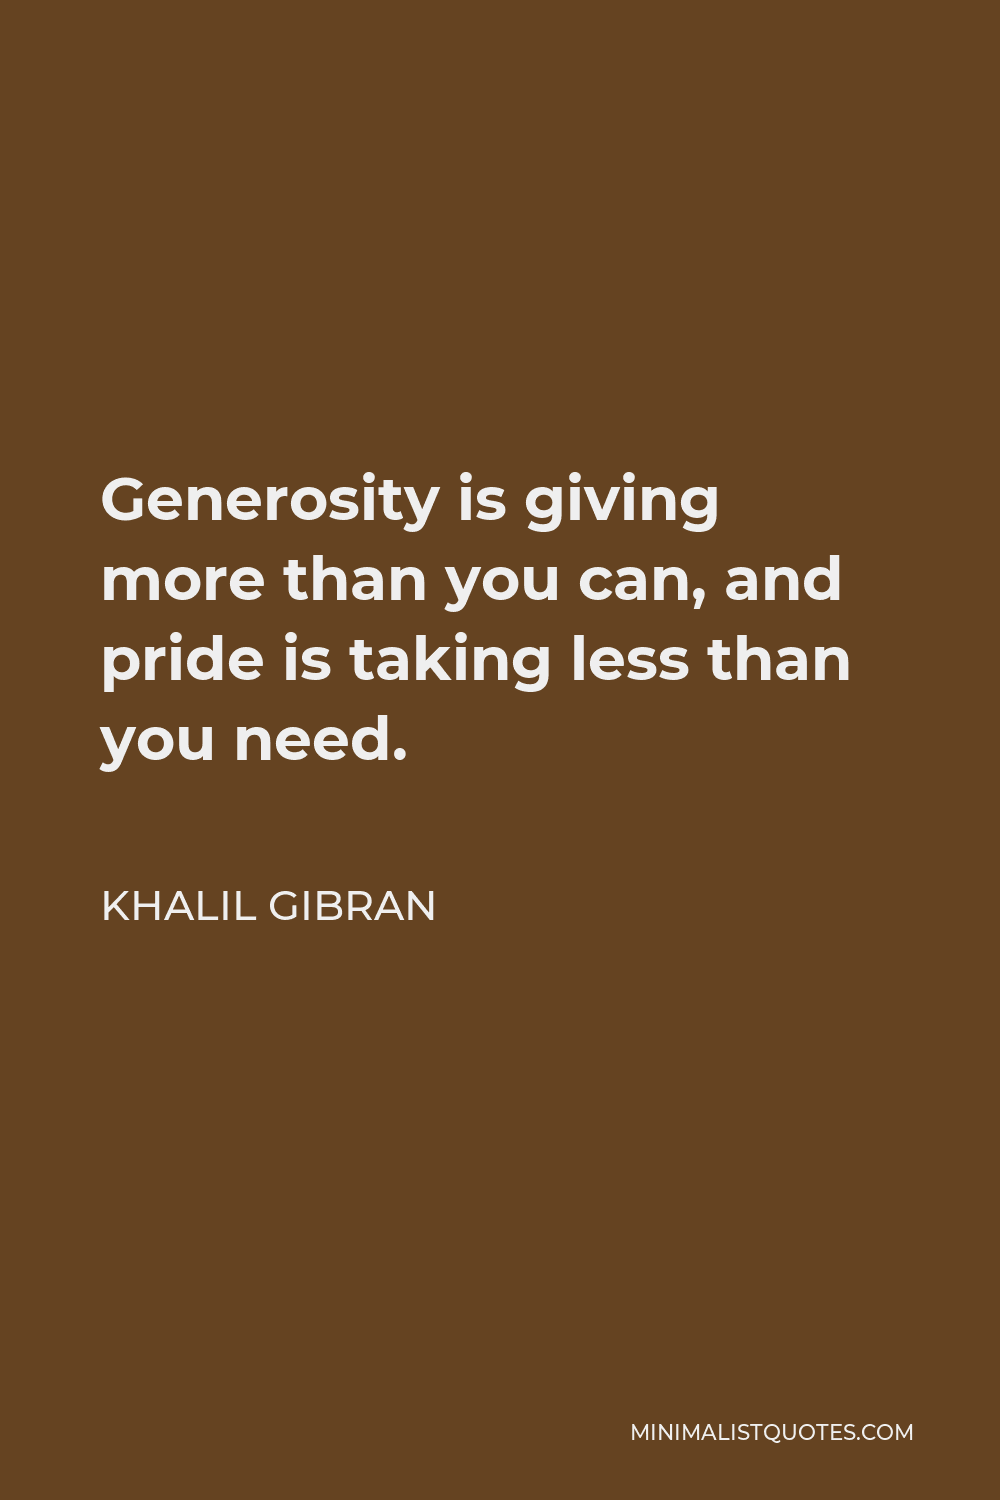 Khalil Gibran Quote - Generosity is giving more than you can, and pride is taking less than you need.